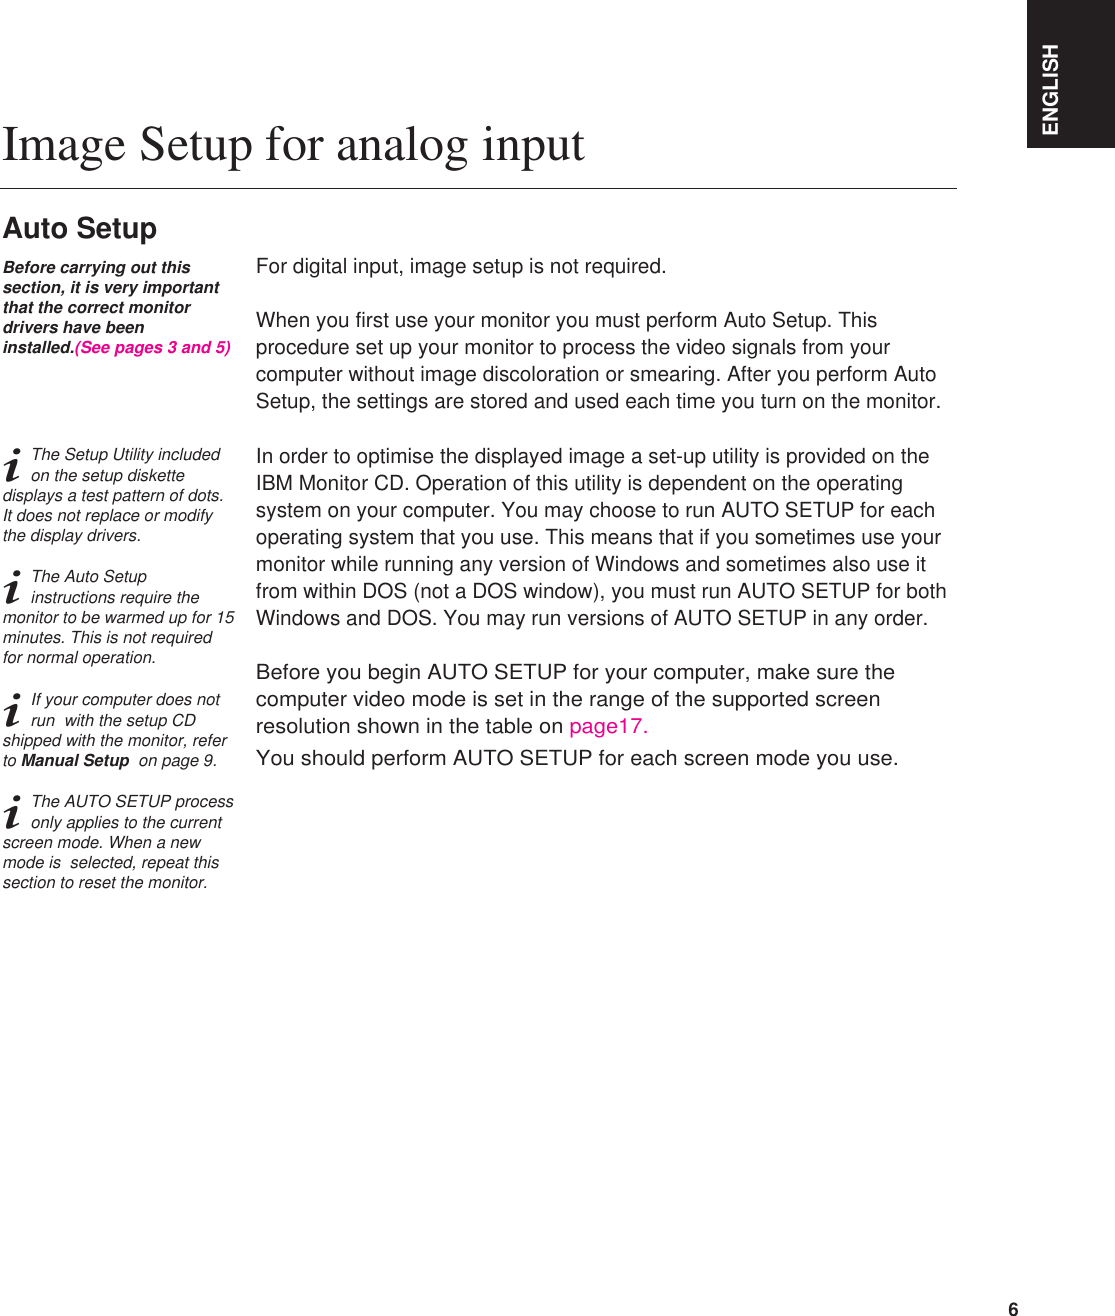 ENGLISH6For digital input, image setup is not required.When you first use your monitor you must perform Auto Setup. Thisprocedure set up your monitor to process the video signals from yourcomputer without image discoloration or smearing. After you perform AutoSetup, the settings are stored and used each time you turn on the monitor.In order to optimise the displayed image a set-up utility is provided on theIBM Monitor CD. Operation of this utility is dependent on the operatingsystem on your computer. You may choose to run AUTO SETUP for eachoperating system that you use. This means that if you sometimes use yourmonitor while running any version of Windows and sometimes also use itfrom within DOS (not a DOS window), you must run AUTO SETUP for bothWindows and DOS. You may run versions of AUTO SETUP in any order.Before you begin AUTO SETUP for your computer, make sure thecomputer video mode is set in the range of the supported screenresolution shown in the table on page17.You should perform AUTO SETUP for each screen mode you use.Image Setup for analog inputAuto SetupBefore carrying out thissection, it is very importantthat the correct monitordrivers have beeninstalled.(See pages 3 and 5)iThe Setup Utility includedon the setup diskettedisplays a test pattern of dots.It does not replace or modifythe display drivers.iThe Auto Setupinstructions require themonitor to be warmed up for 15minutes. This is not requiredfor normal operation.iIf your computer does notrun  with the setup CDshipped with the monitor, referto Manual Setup  on page 9.iThe AUTO SETUP processonly applies to the currentscreen mode. When a newmode is  selected, repeat thissection to reset the monitor.ENGLISH